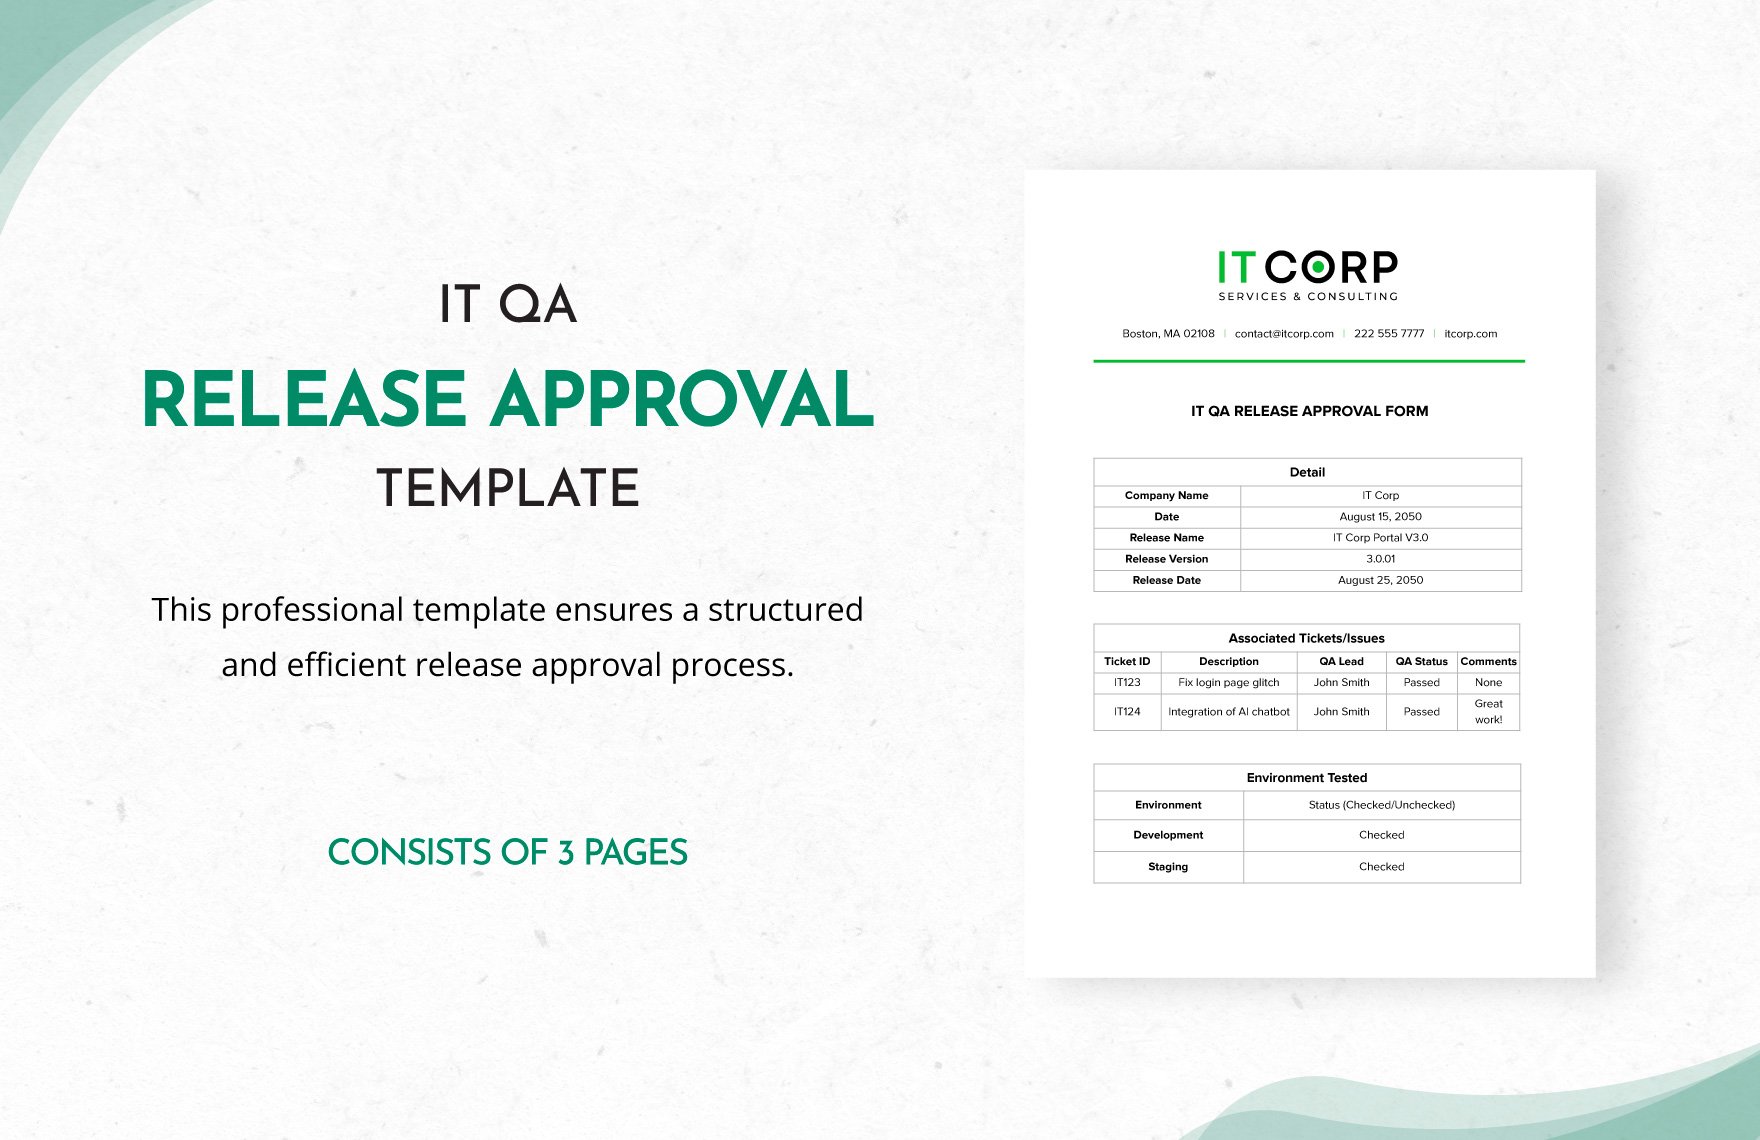 IT QA Release Approval Form Template